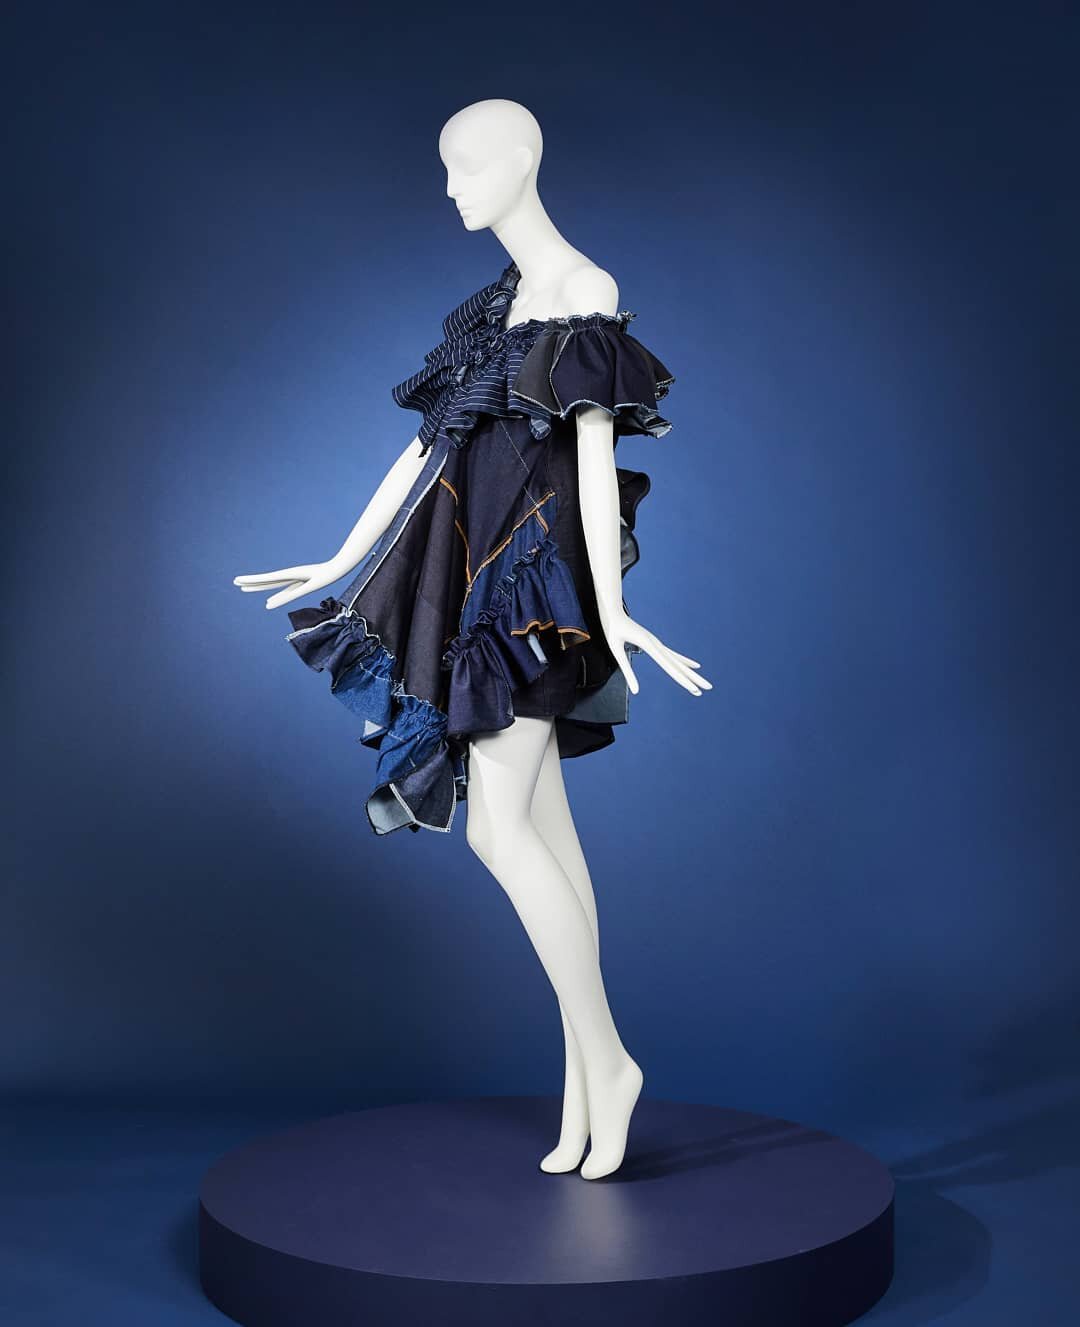 Honored to be chosen to design a look for @scadfash's @derrickadamsny Patrick Kelly exhibition, displayed during SCADstyle at the museum @scadatlfashion. The dress is pieced together recycled denim

#patrickkelly #derrickadams #recycleddenim